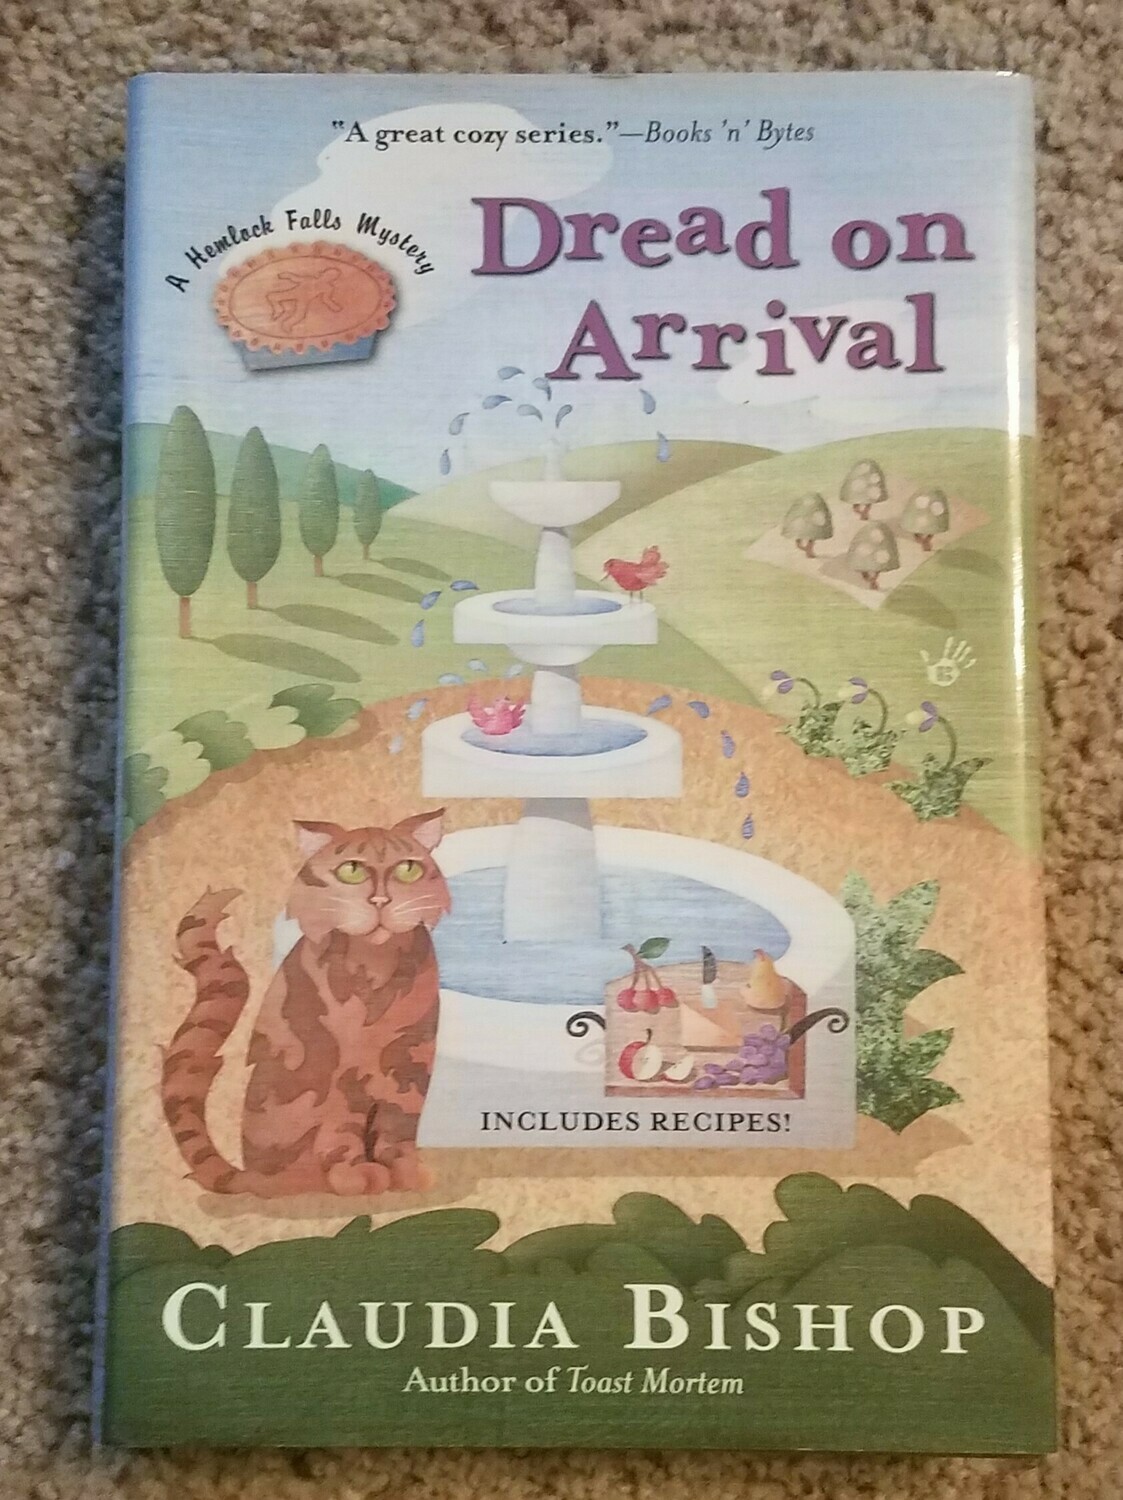 Dread on Arrival by Claudia Bishop